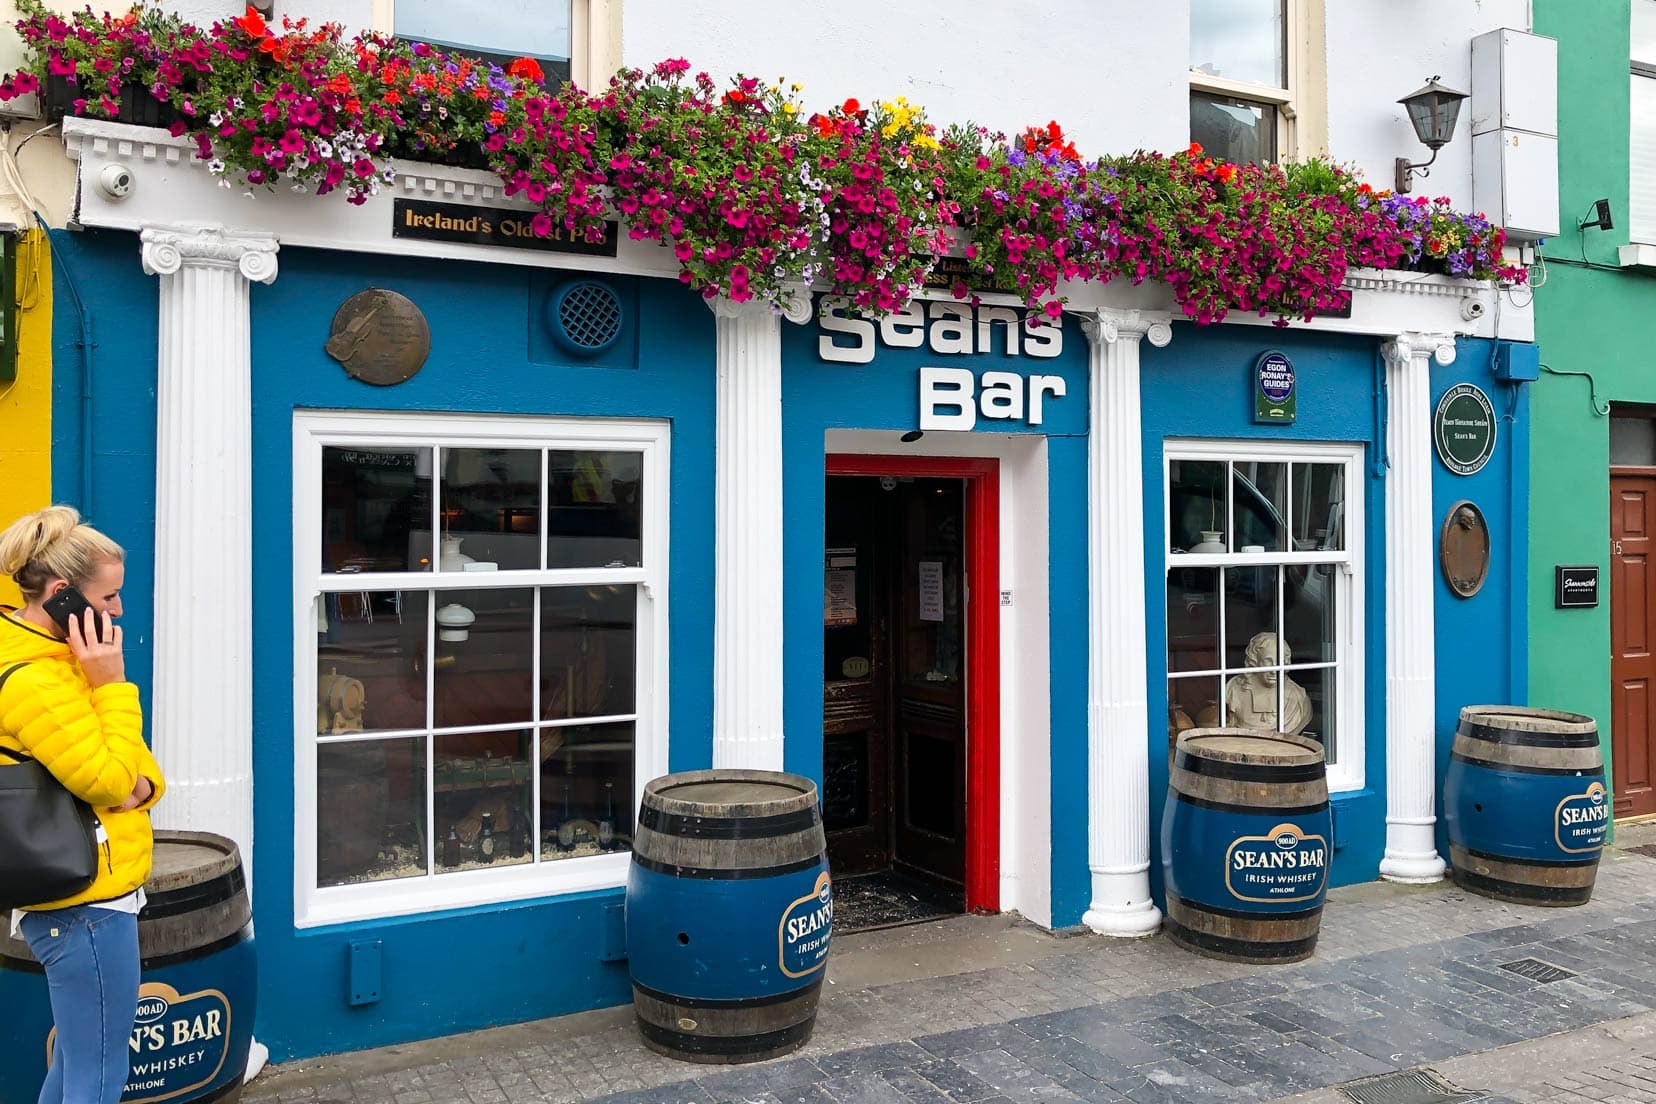 Seans bar facade on the outside - blue walls and flowers above the sign